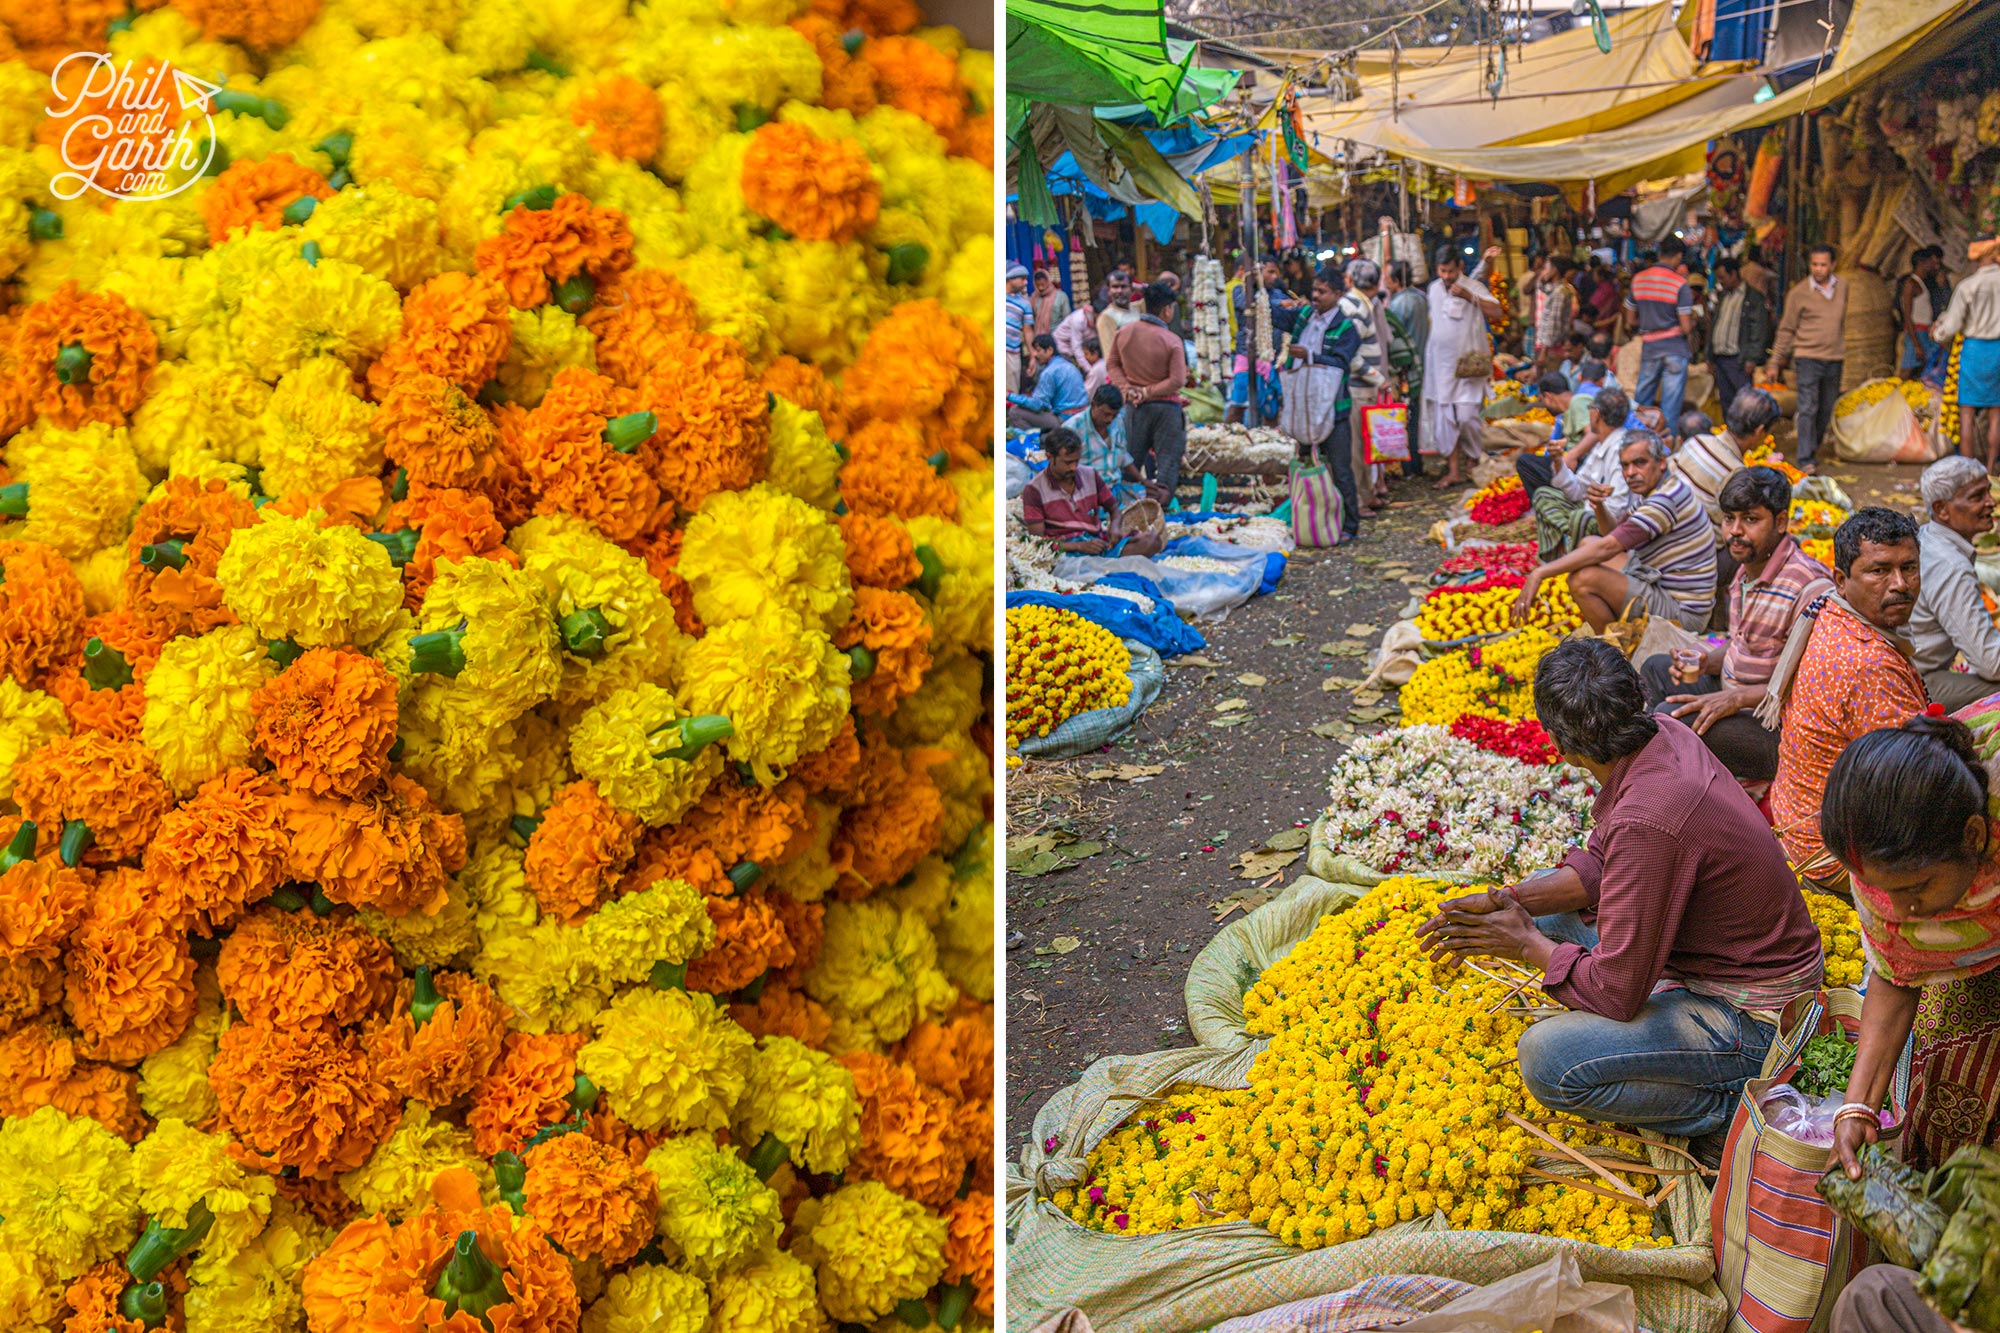 So many orange and yellow marigold flowers - they are made into religious garlands and bouquets for weddings